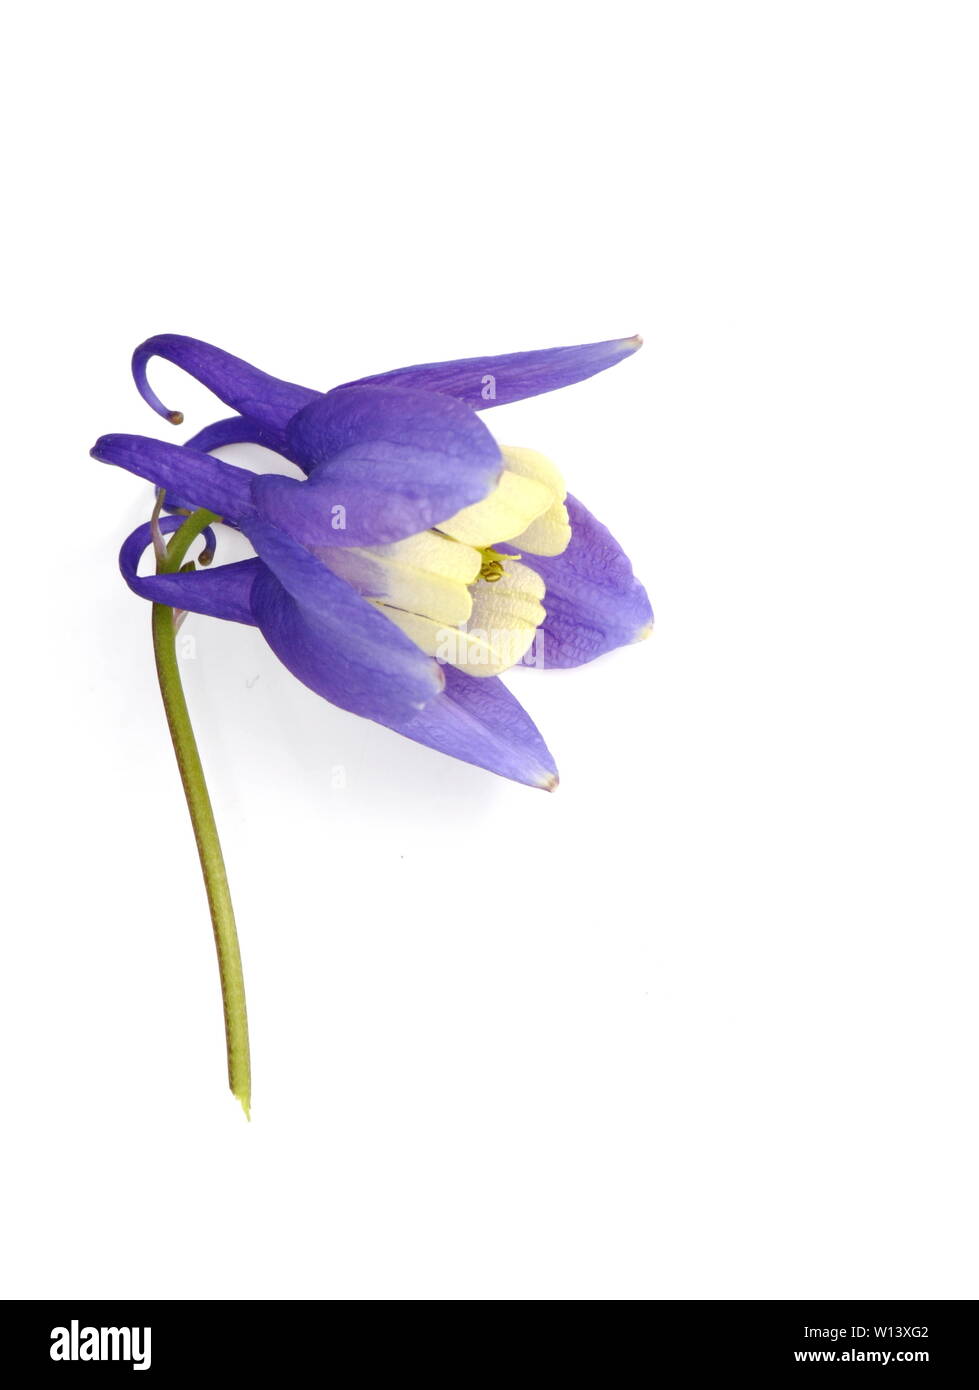 Closeup on the flower of a blue and white Columbine on white background Stock Photo